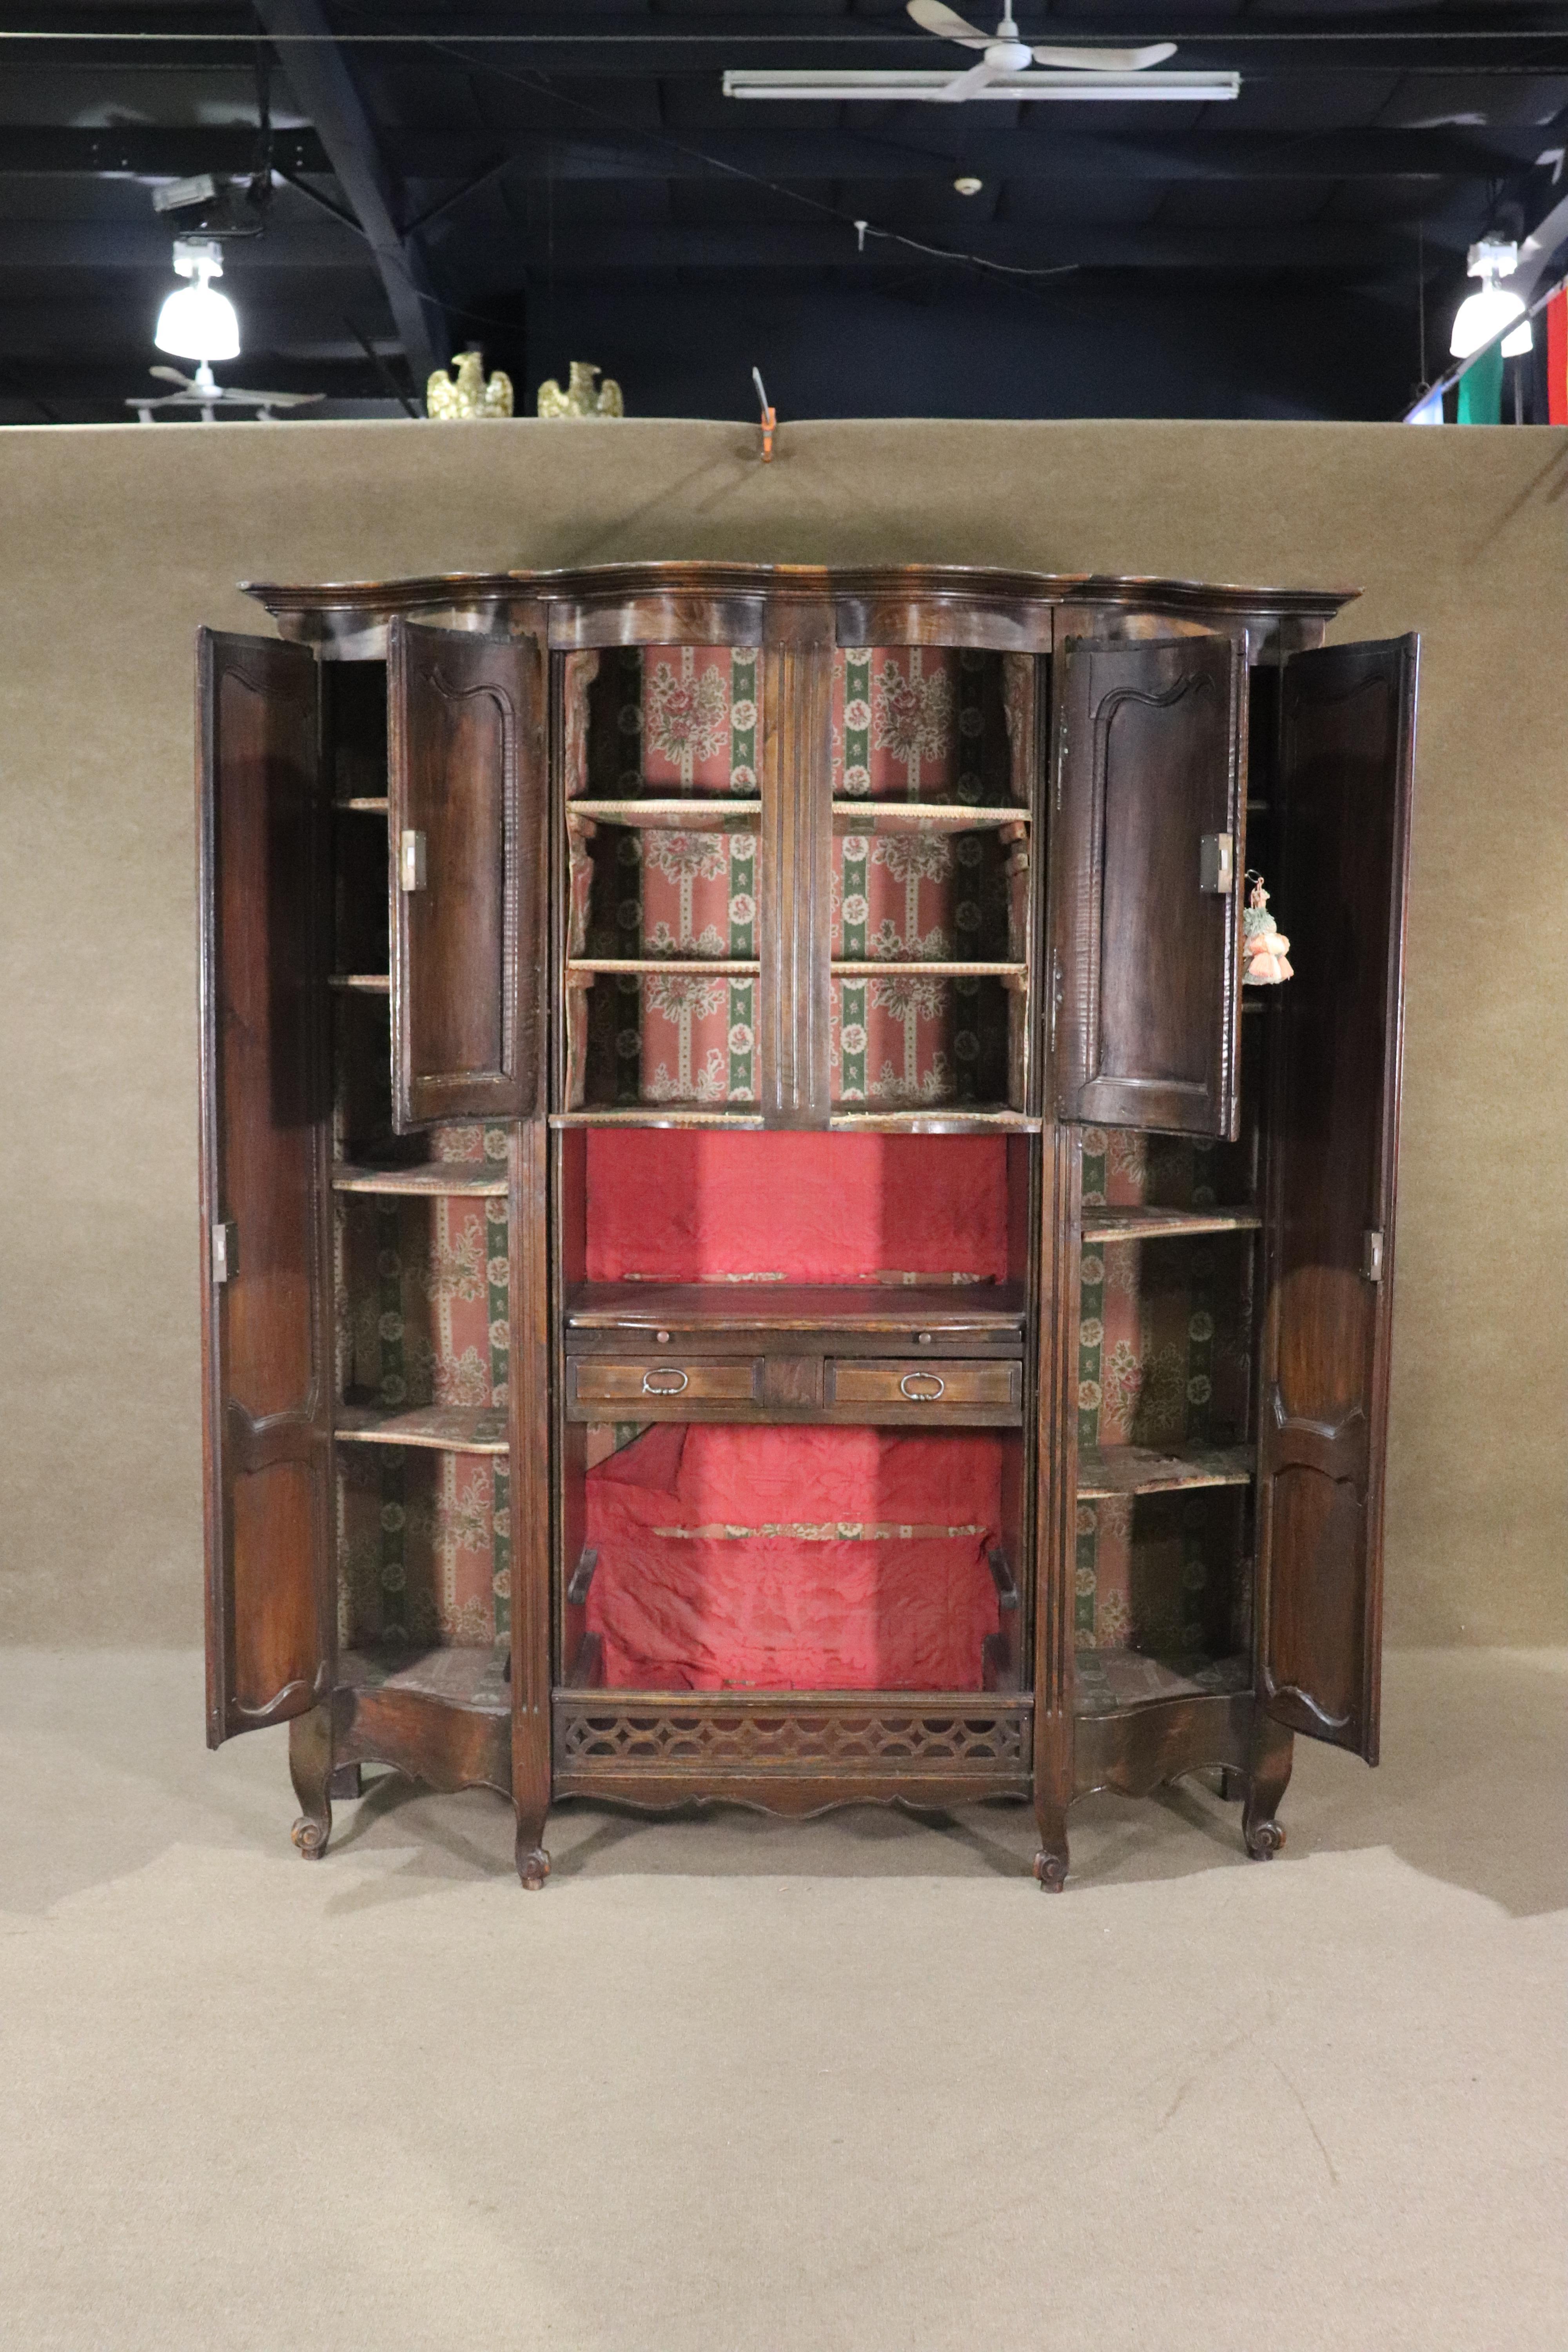 Large antique French armoire with storage. This relic works for living room, kitchen or bedroom storage needs.
Please confirm location NY or NJ